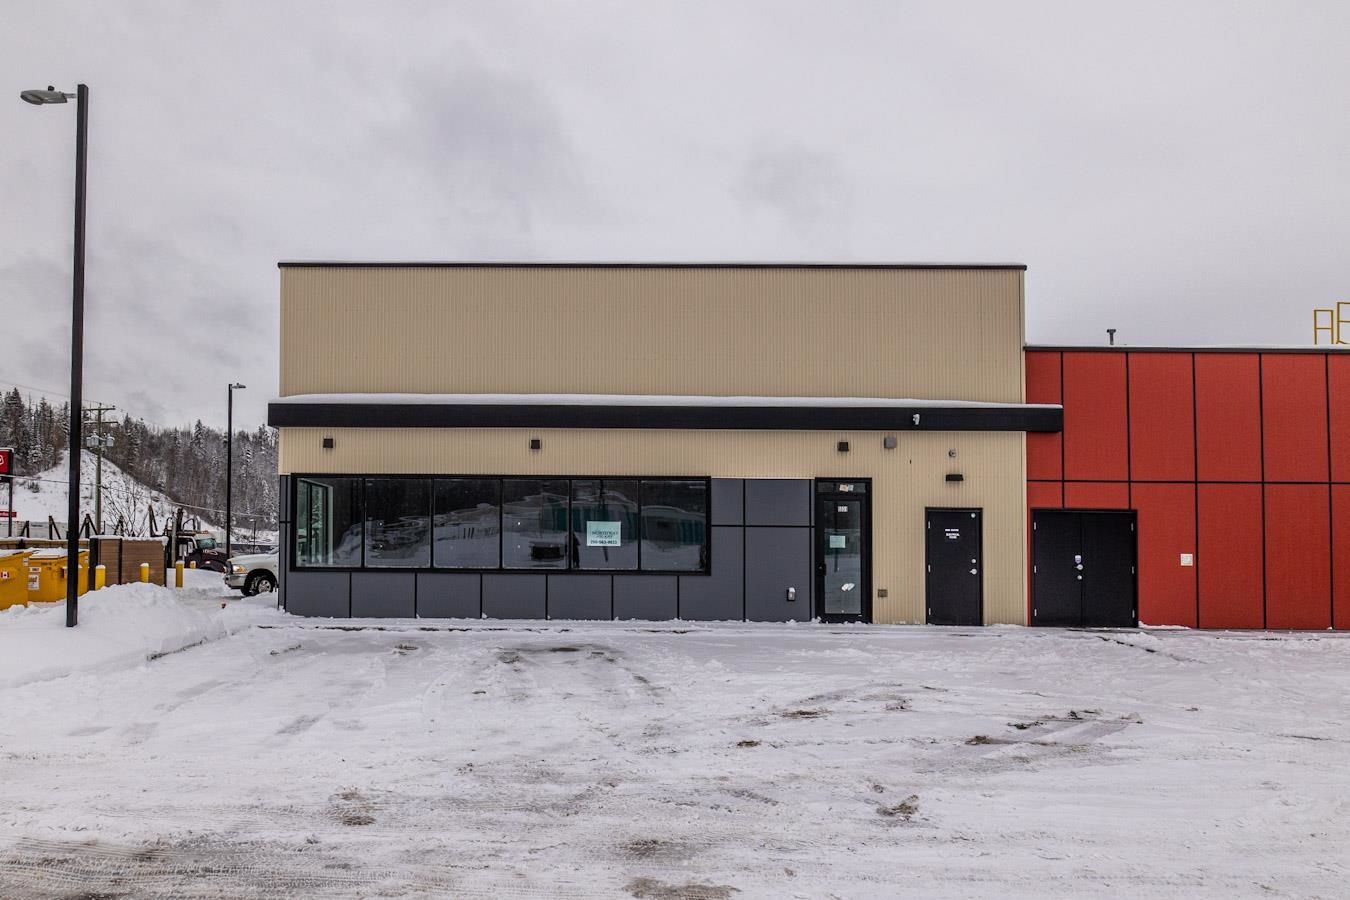 Main Photo: 5531 HARTWAY Drive in Prince George: Valleyview Office for lease (PG City North)  : MLS®# C8048771